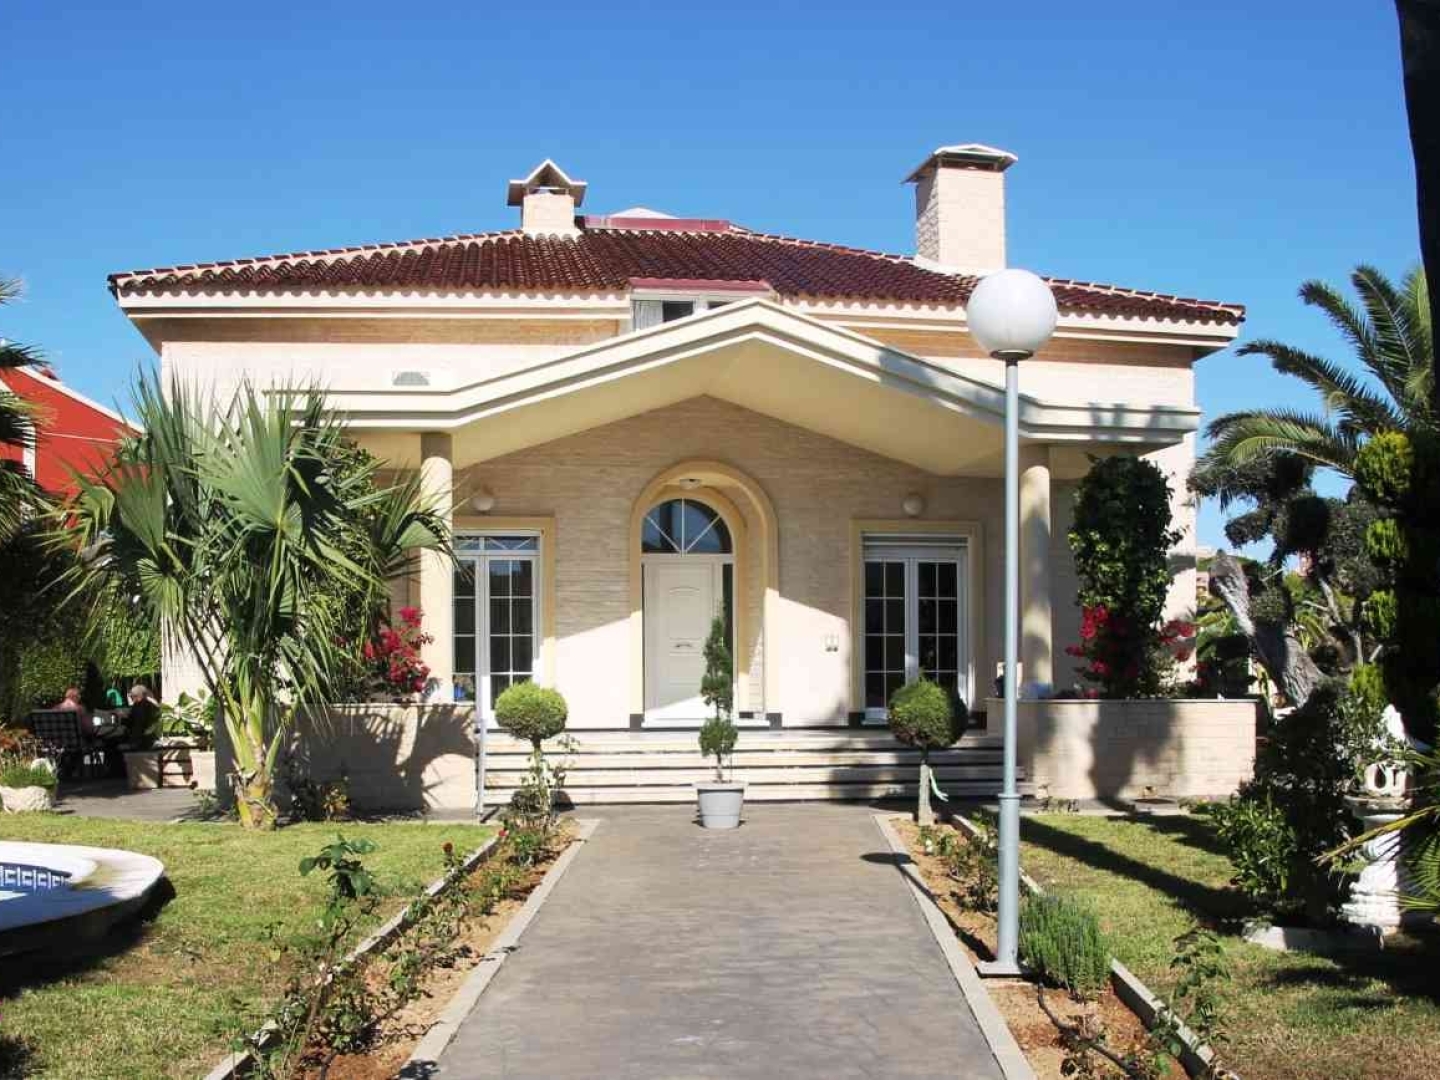 An exceptional Villa competitively priced located just 150m from Mil Palmeras beach